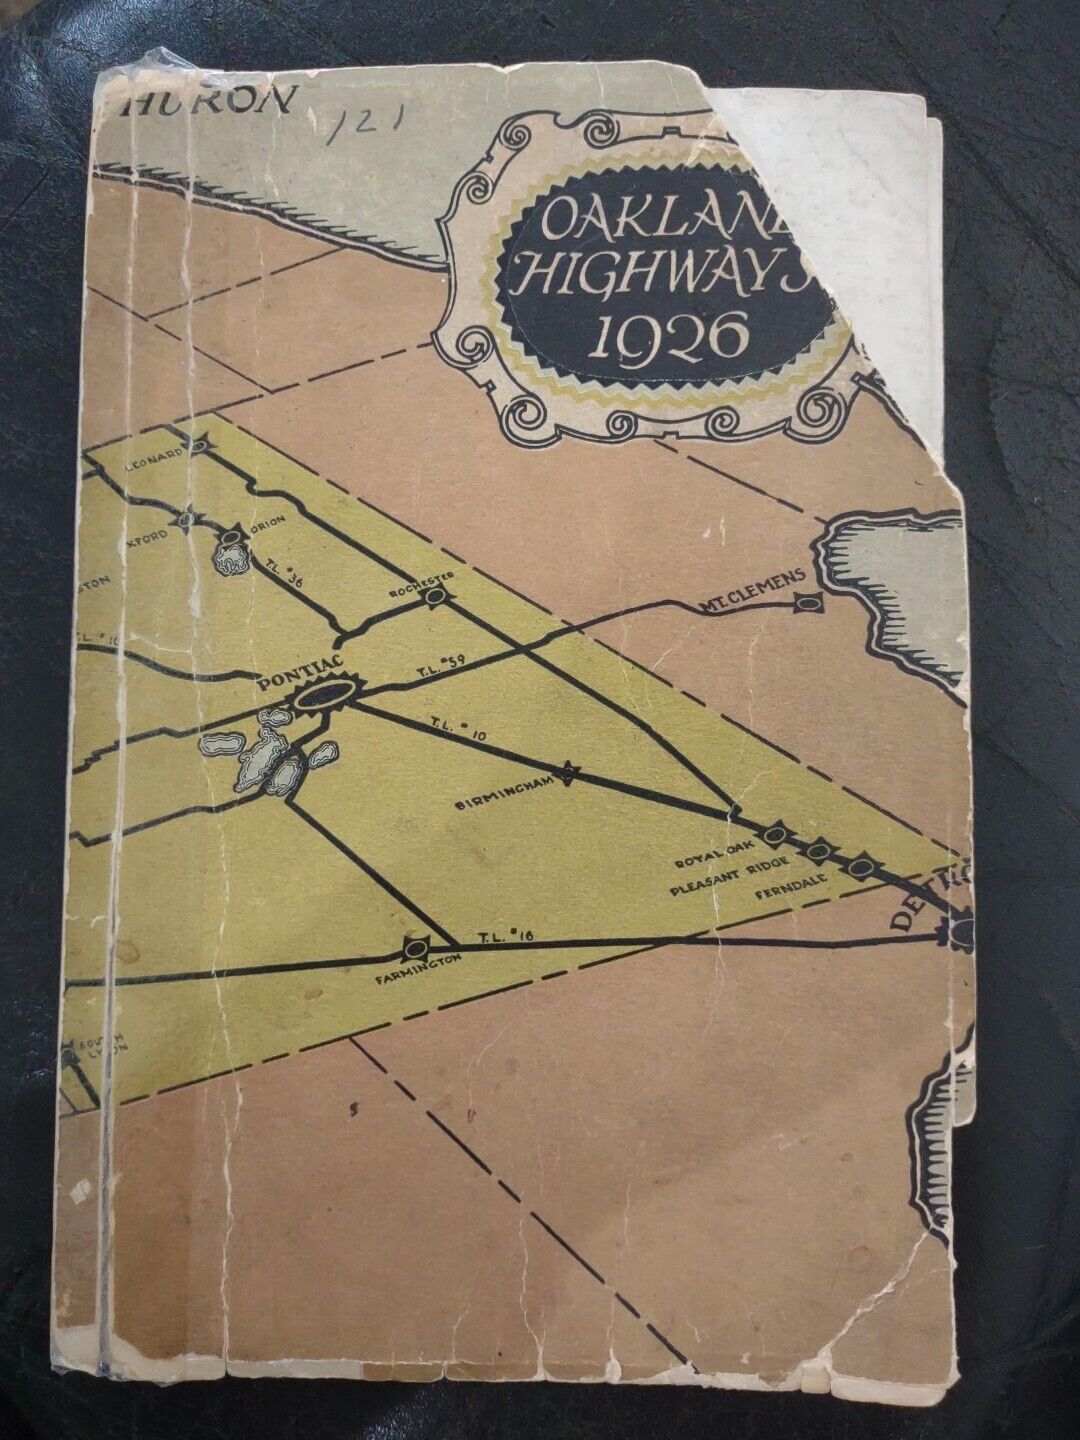 OAKLAND COUNTY HIGHWAYS 1926 PHOTOS AND ROAD MAP RARE MICHIGAN